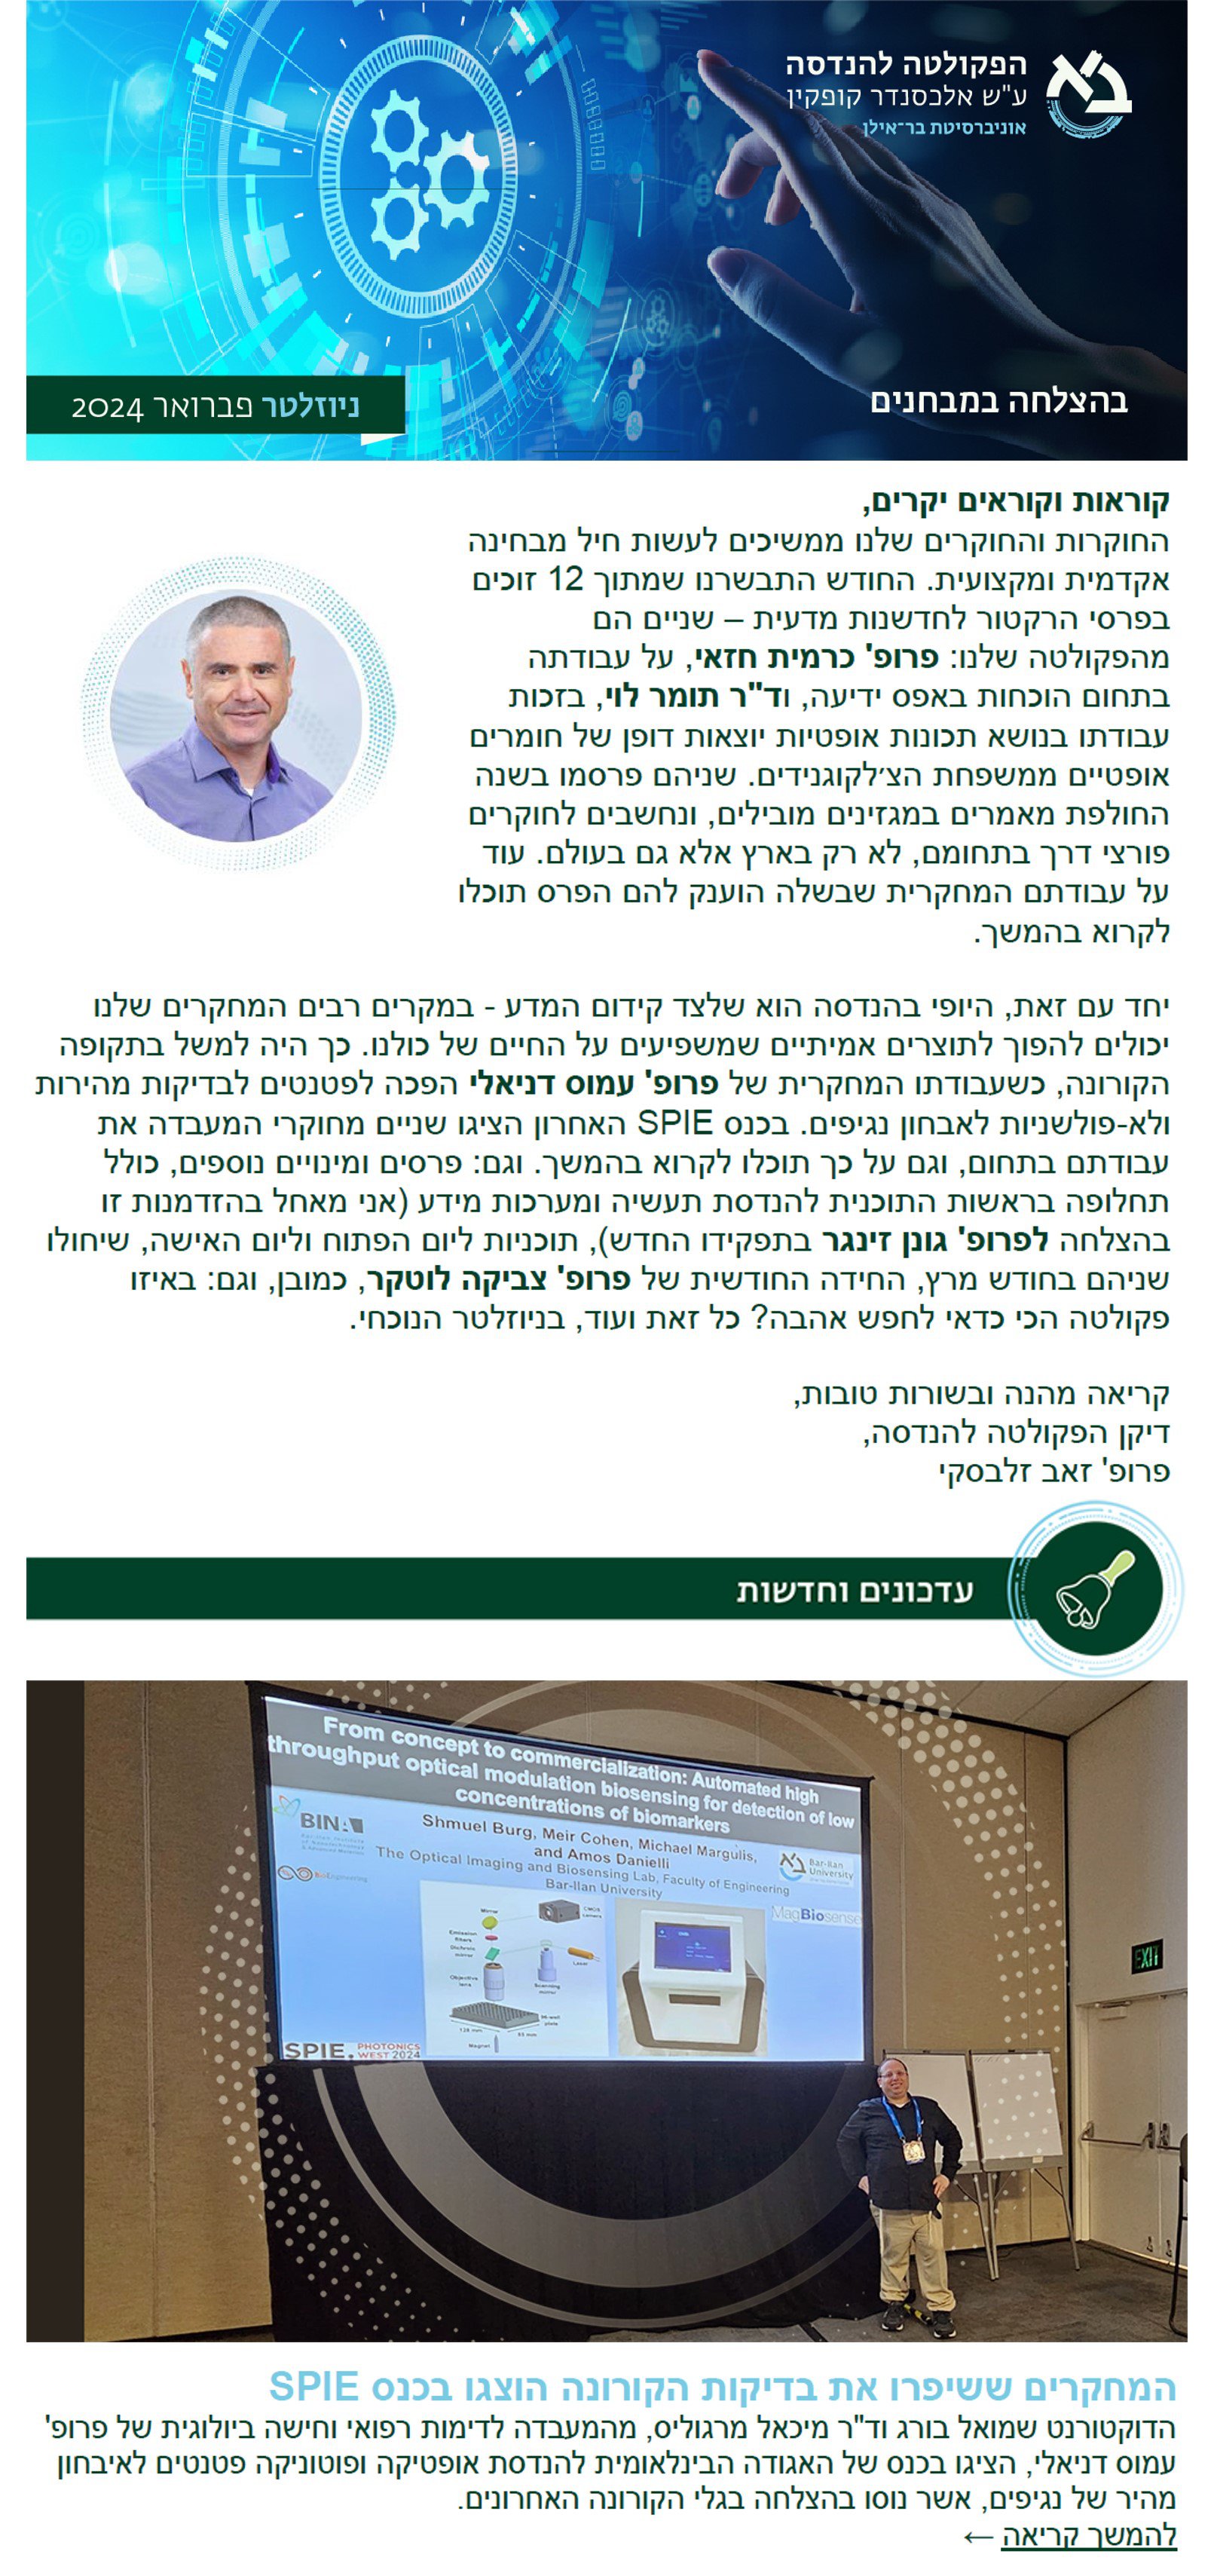 An article in the newsletter of the Faculty of Engineering at Bar-Ilan University highlighted our recent presentations at the SPIE  2024 Photonics West conference. During the presentations, our Ph.D. student Shmuel Burg and Dr. Michael Margulis, showcased their virus detection patents which were successfully tested during the COVID-19 outbreaks.